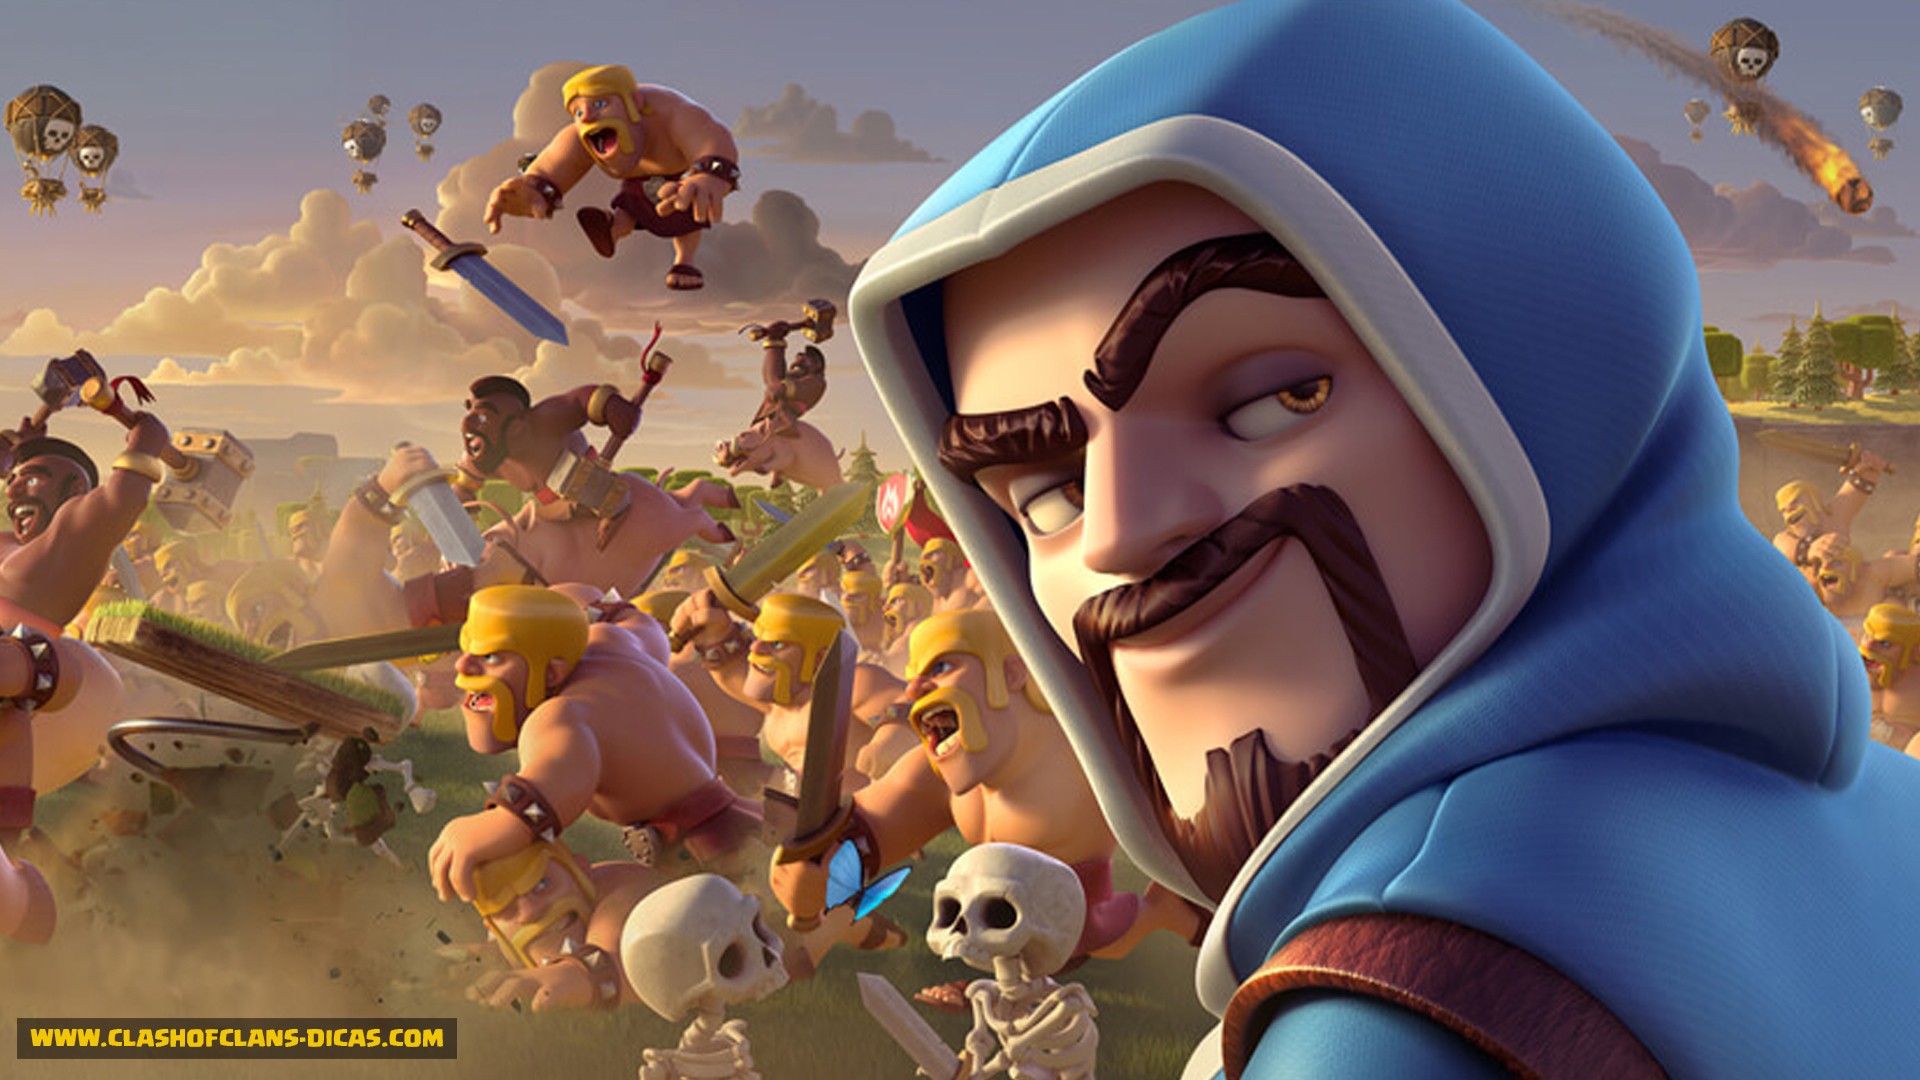 Clash of Clans wallpaper ·① Download free cool wallpapers ...